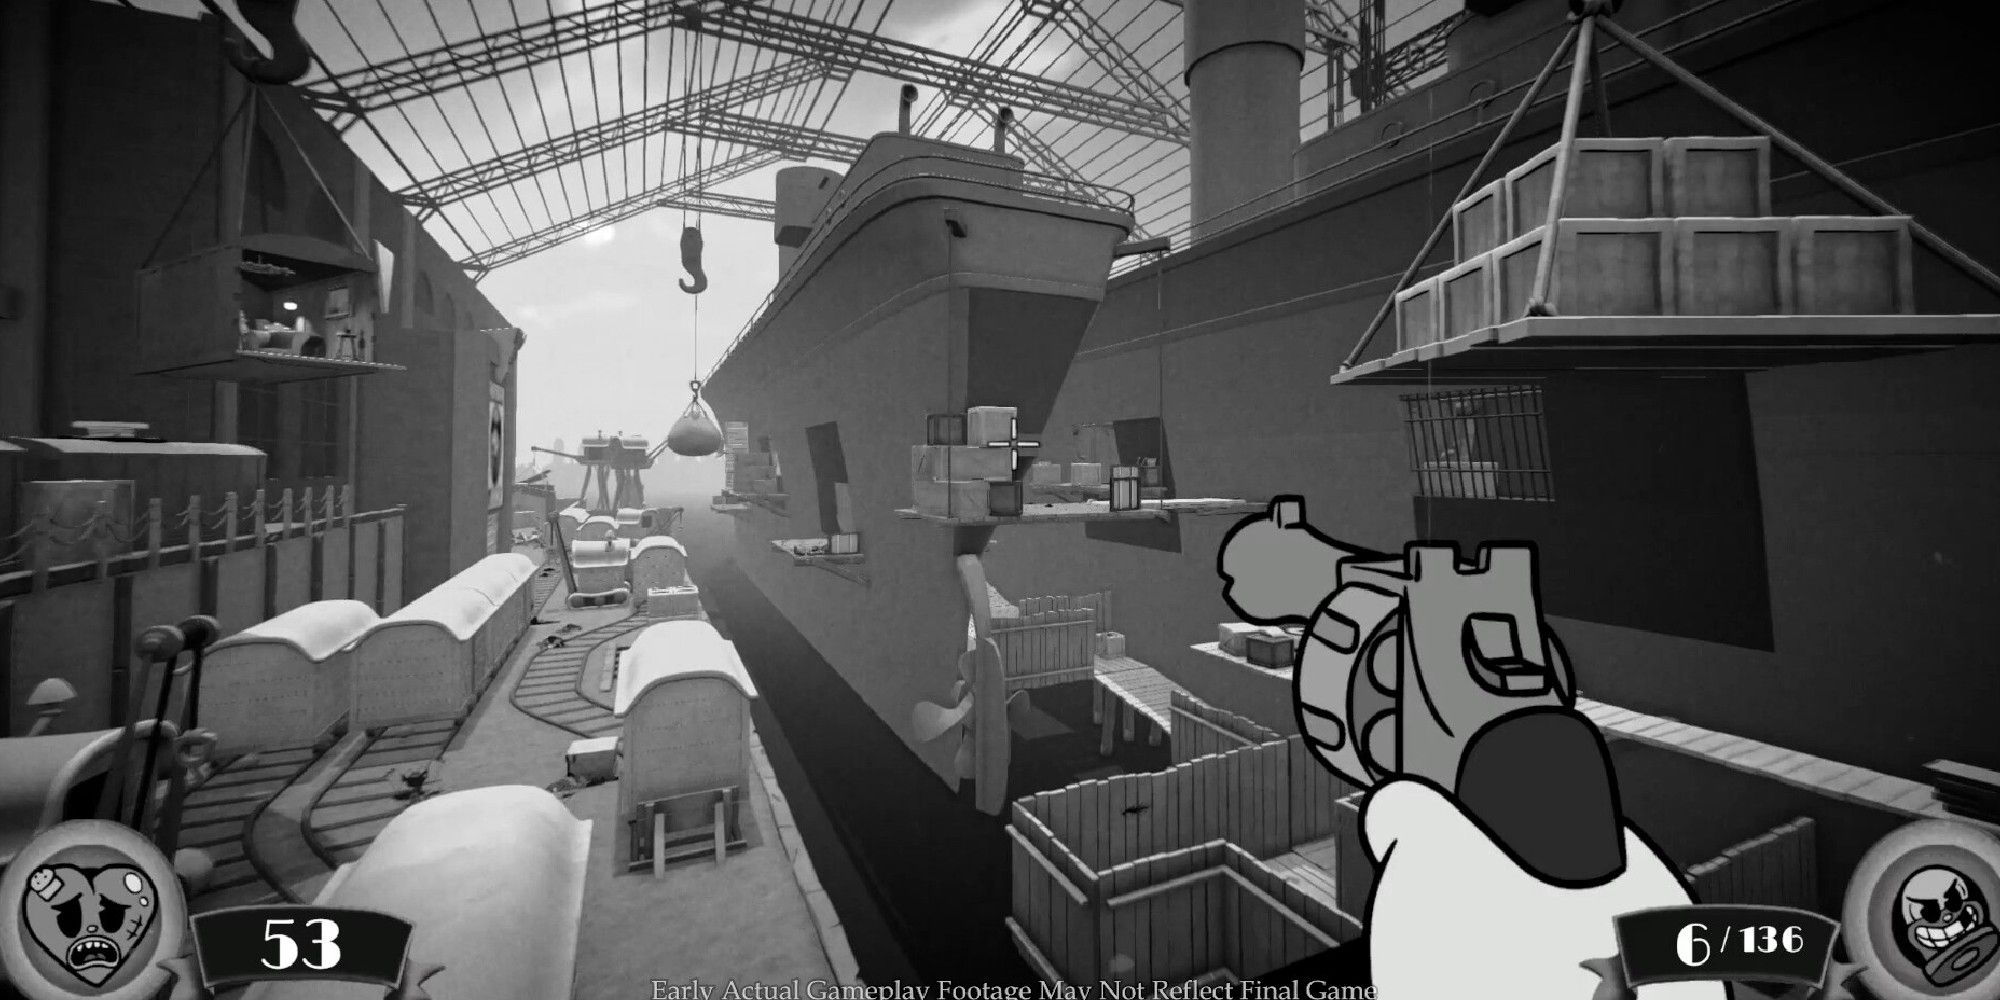 Old Mickey Mouse cartoon graphics showing a black-and-white world, first-person view, with a hand aiming a gun